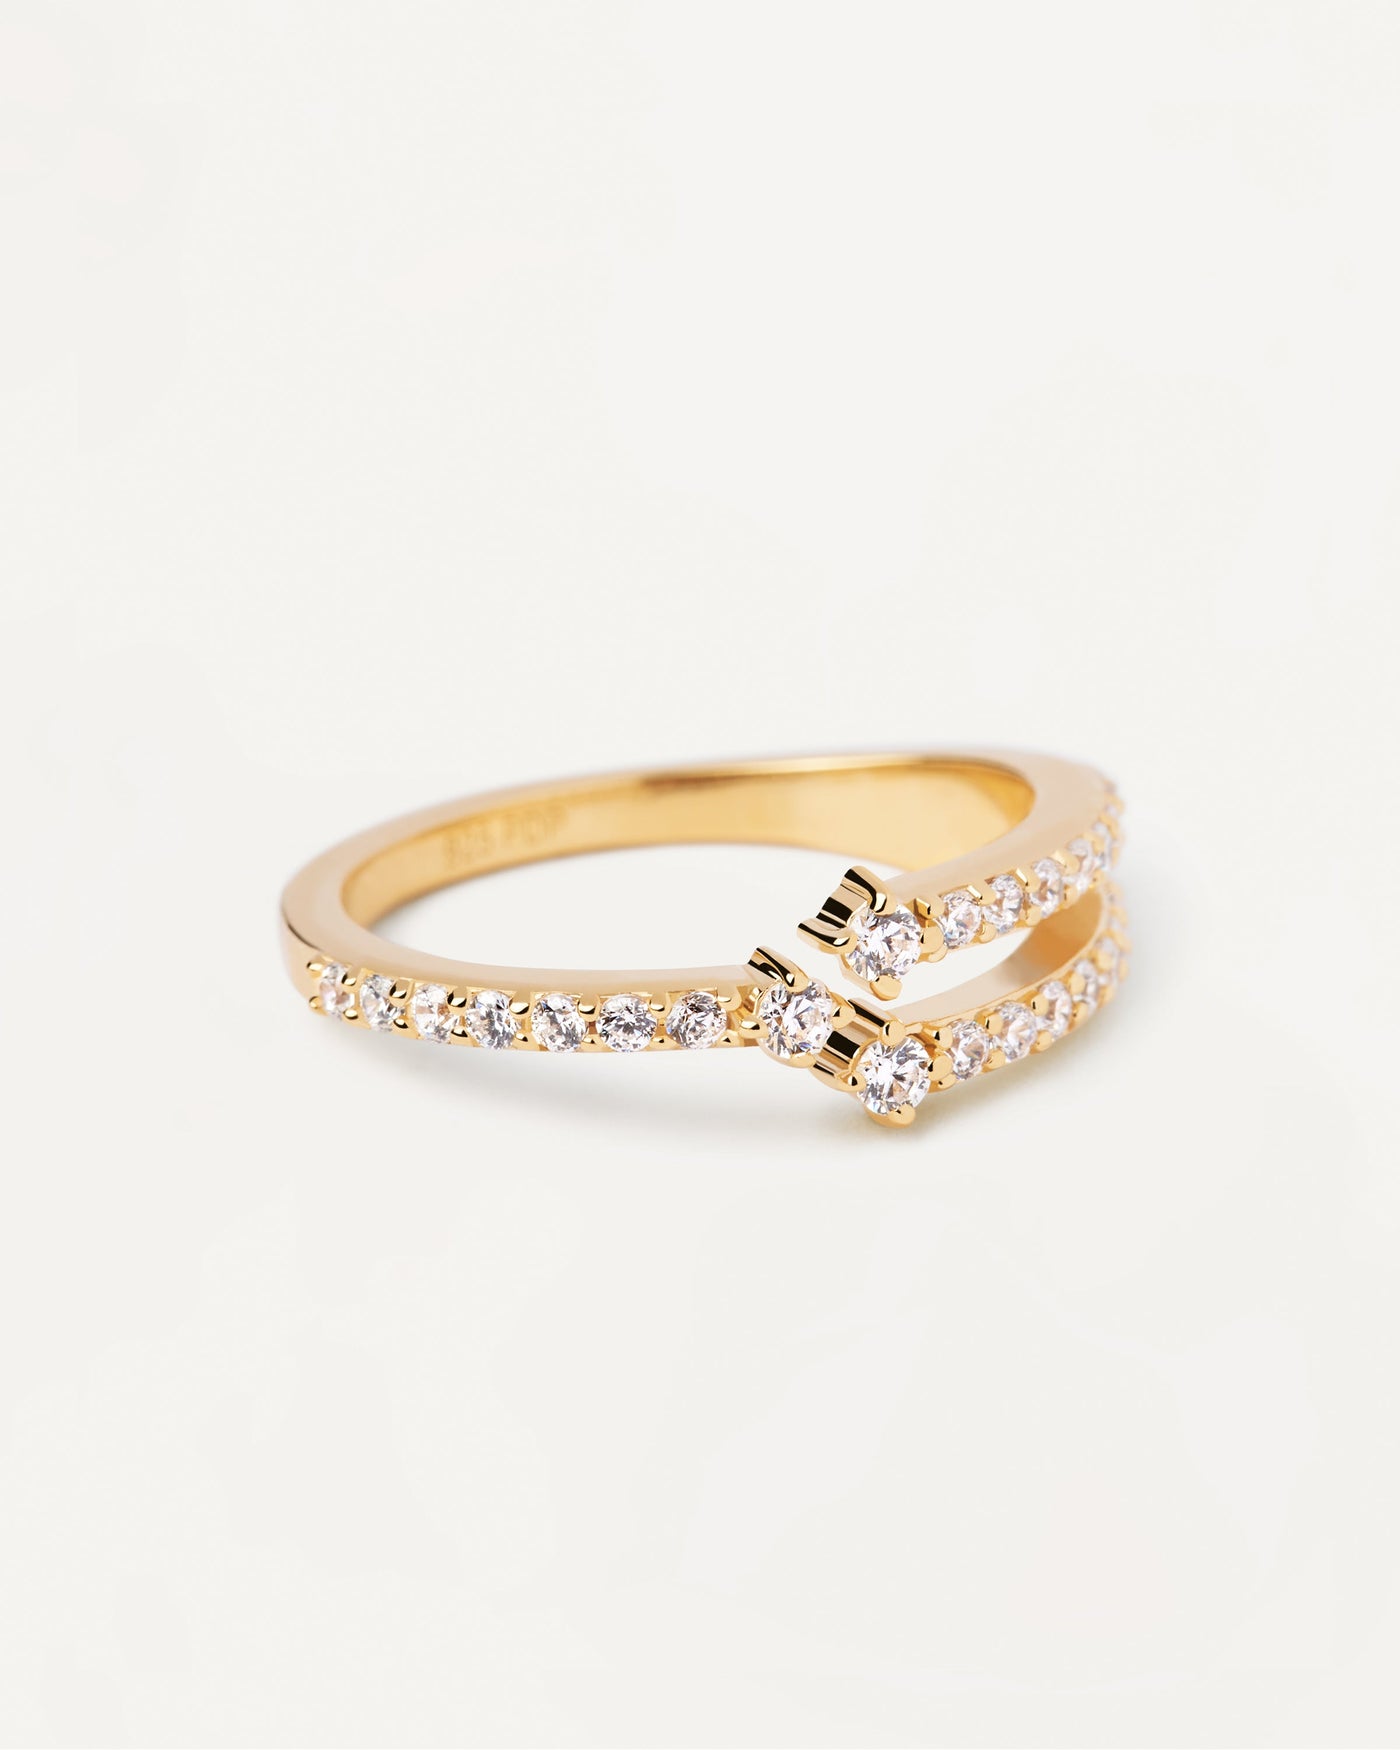 2023 Selection | Sisi Ring. Shiny zirconia ring in gold-plated silver. Get the latest arrival from PDPAOLA. Place your order safely and get this Best Seller. Free Shipping.